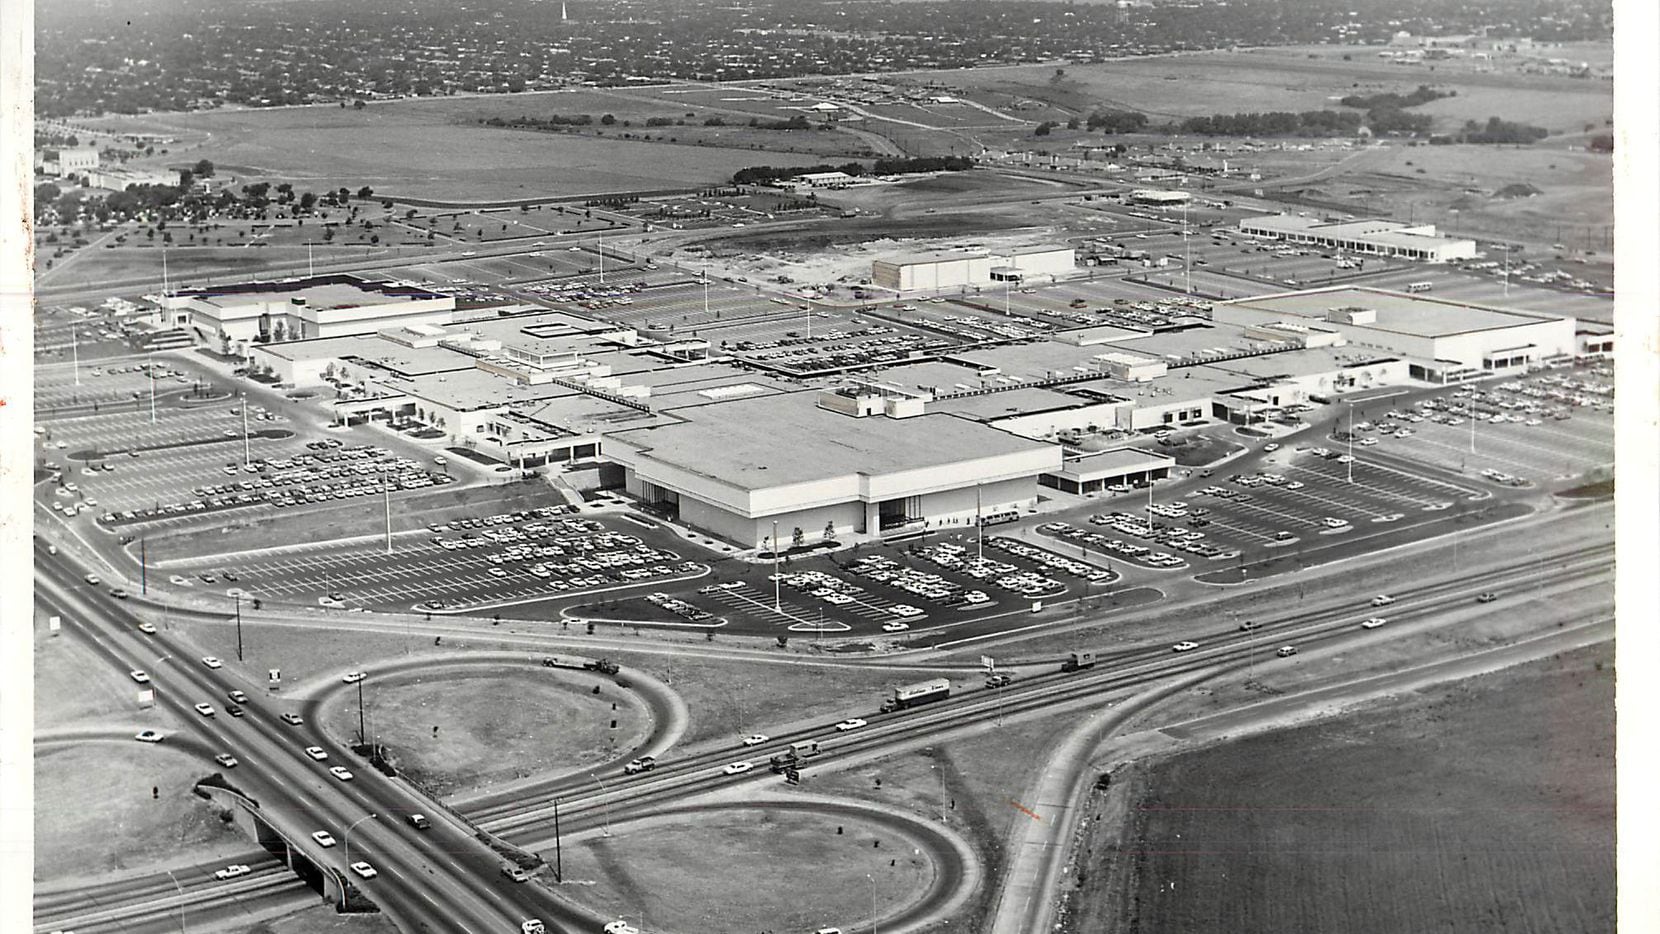 NorthPark Center, Timeless Architecture Brings Fifty Years of Success